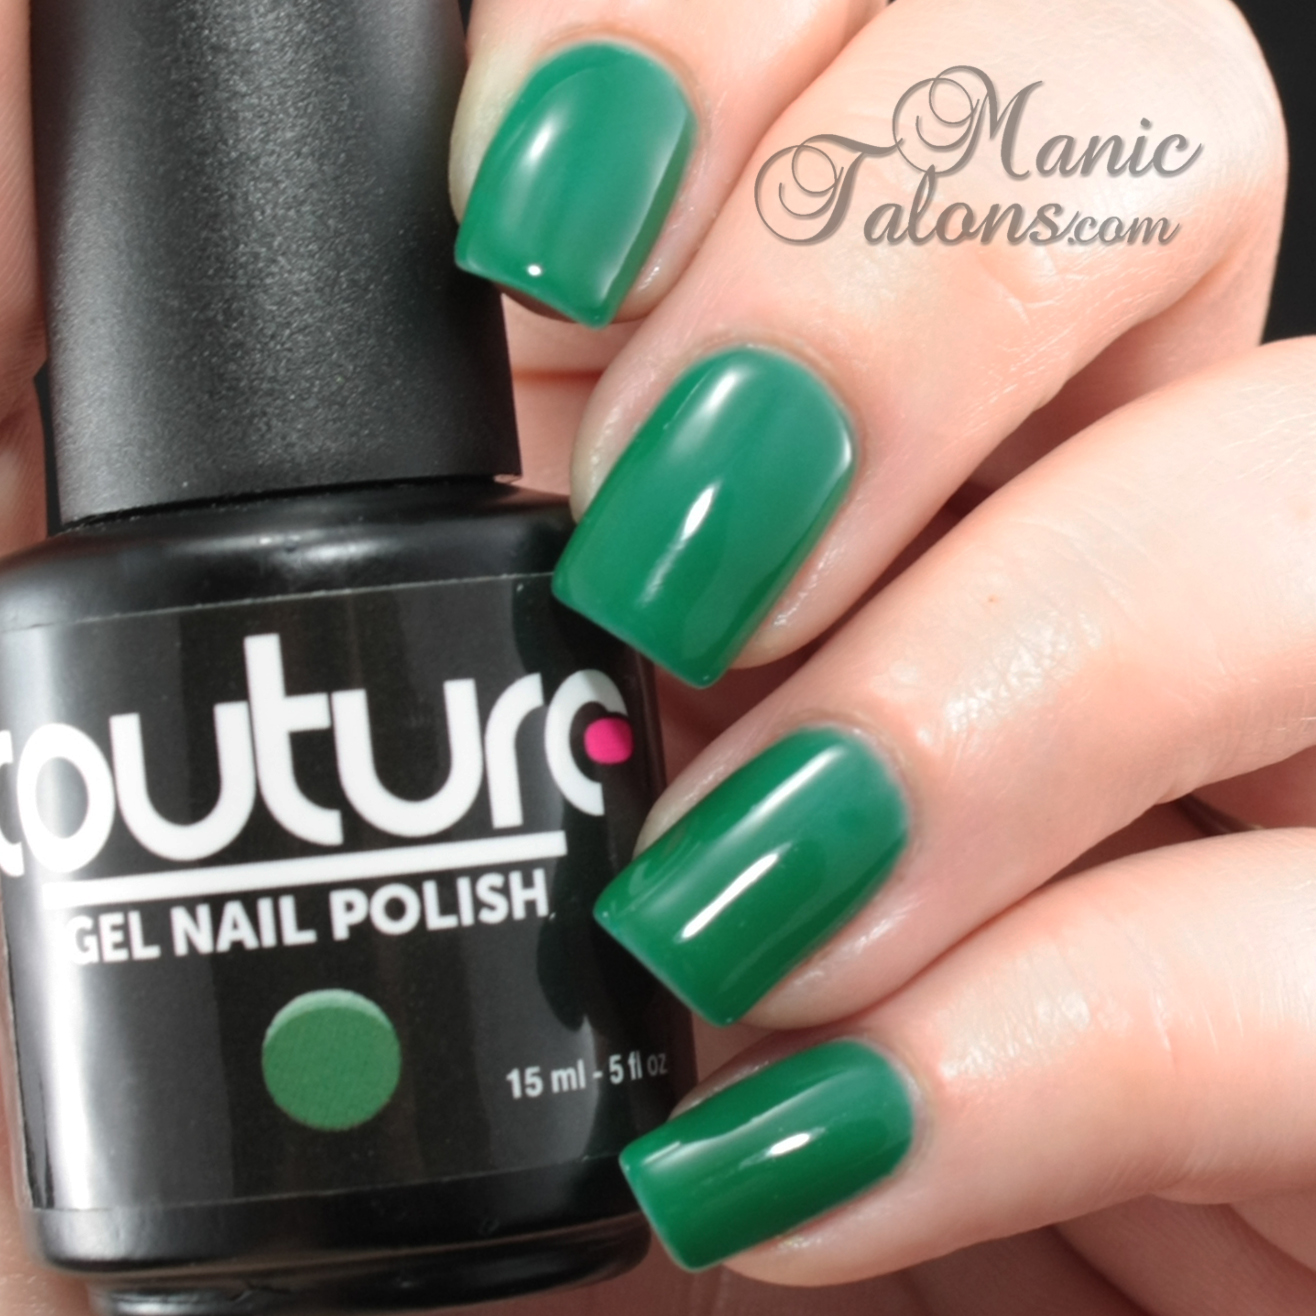 Couture Soak Off Gel Polish High Roller Swatch